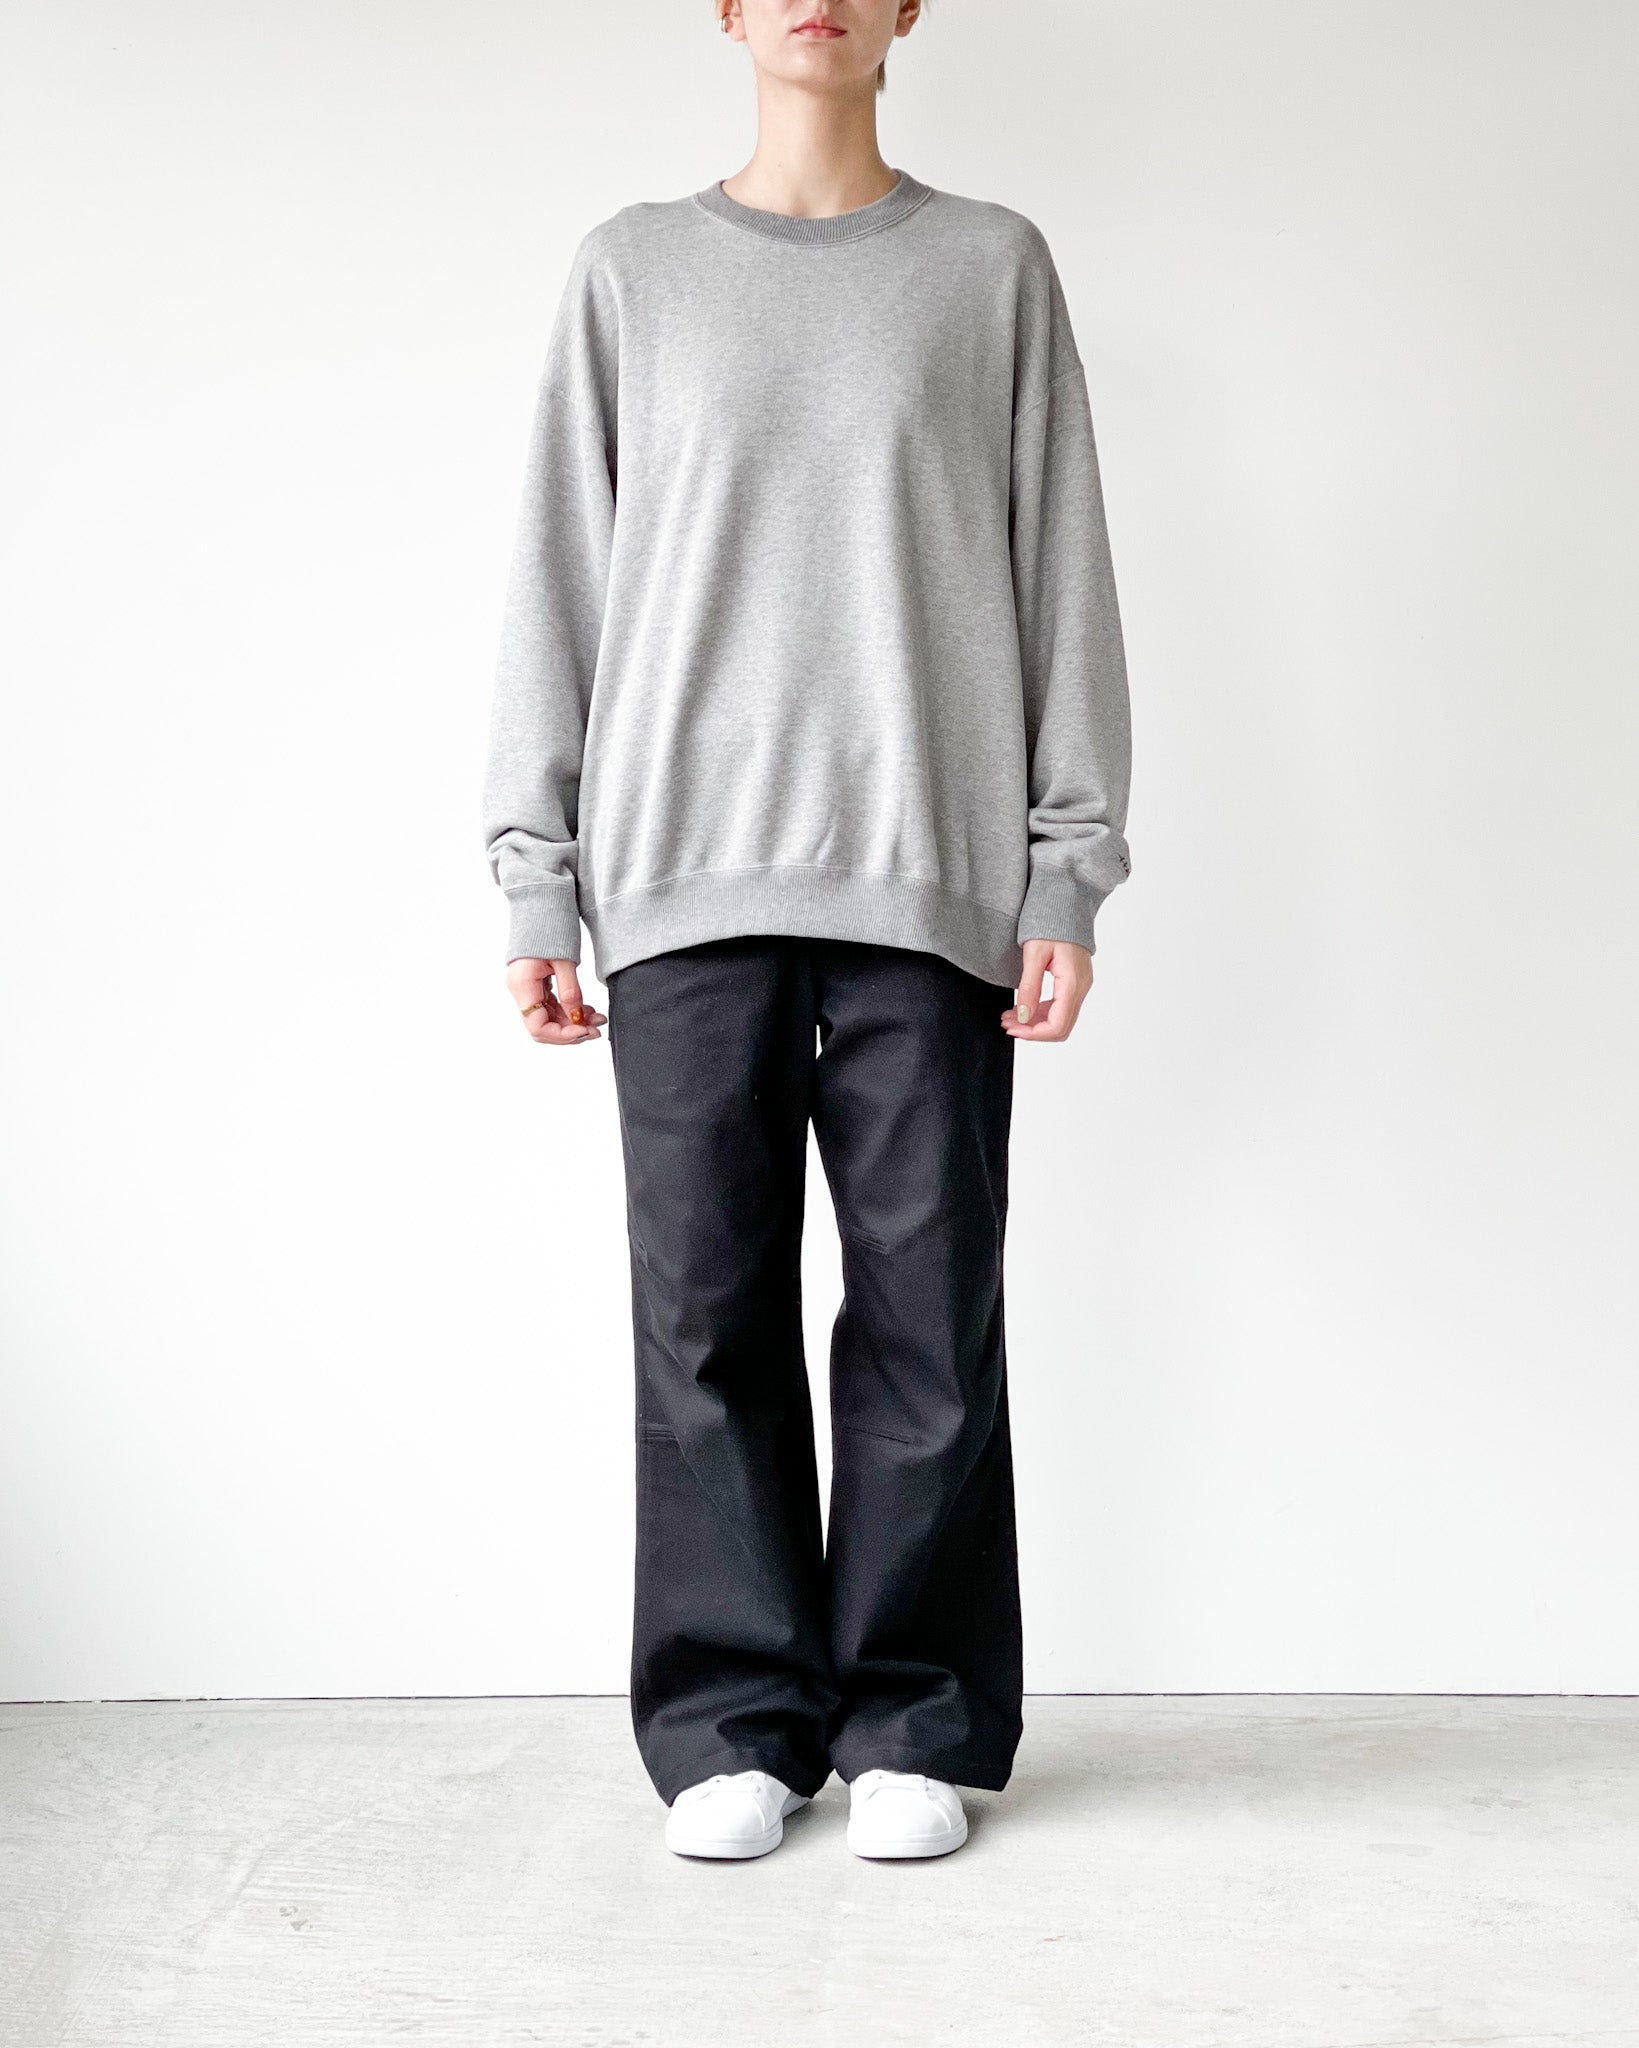 【THE HOTEL LOBBY ARCHIVES】PLANE SWEAT SHIRT - GRAY